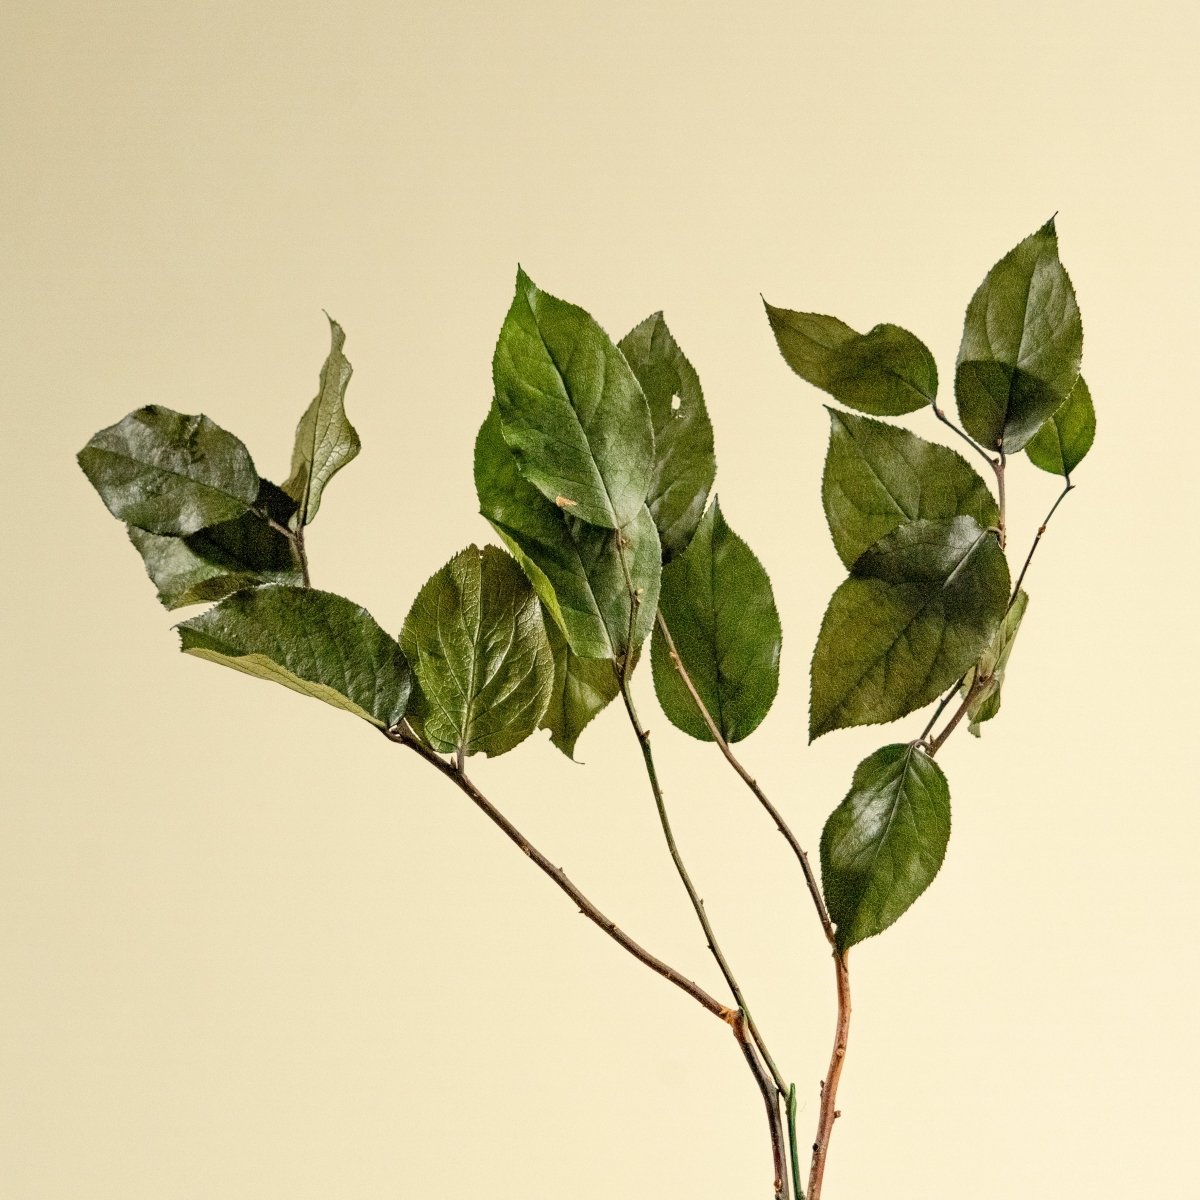 Salal - Dried and Preserved Salal - Dried Salal Leaves - Salal Leaves Green  Color - Dried Foliage - DIY Fowers - Dried Greenery